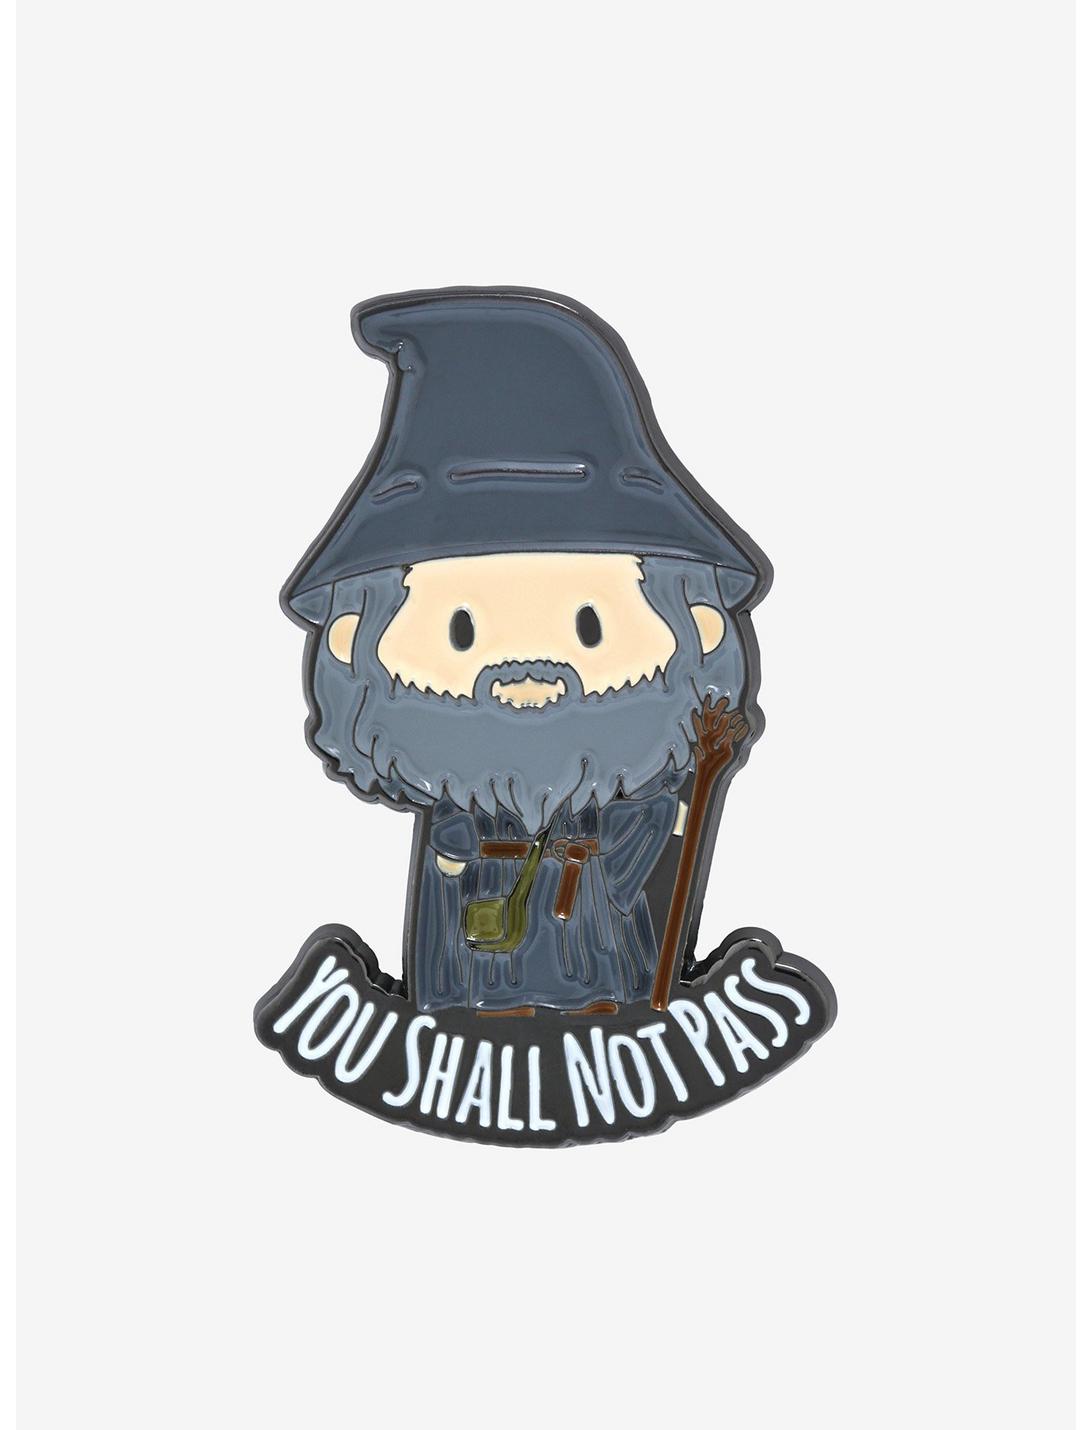 The Lord of the Rings Gandalf Chibi Enamel Pin - BoxLunch Exclusive, , hi-res